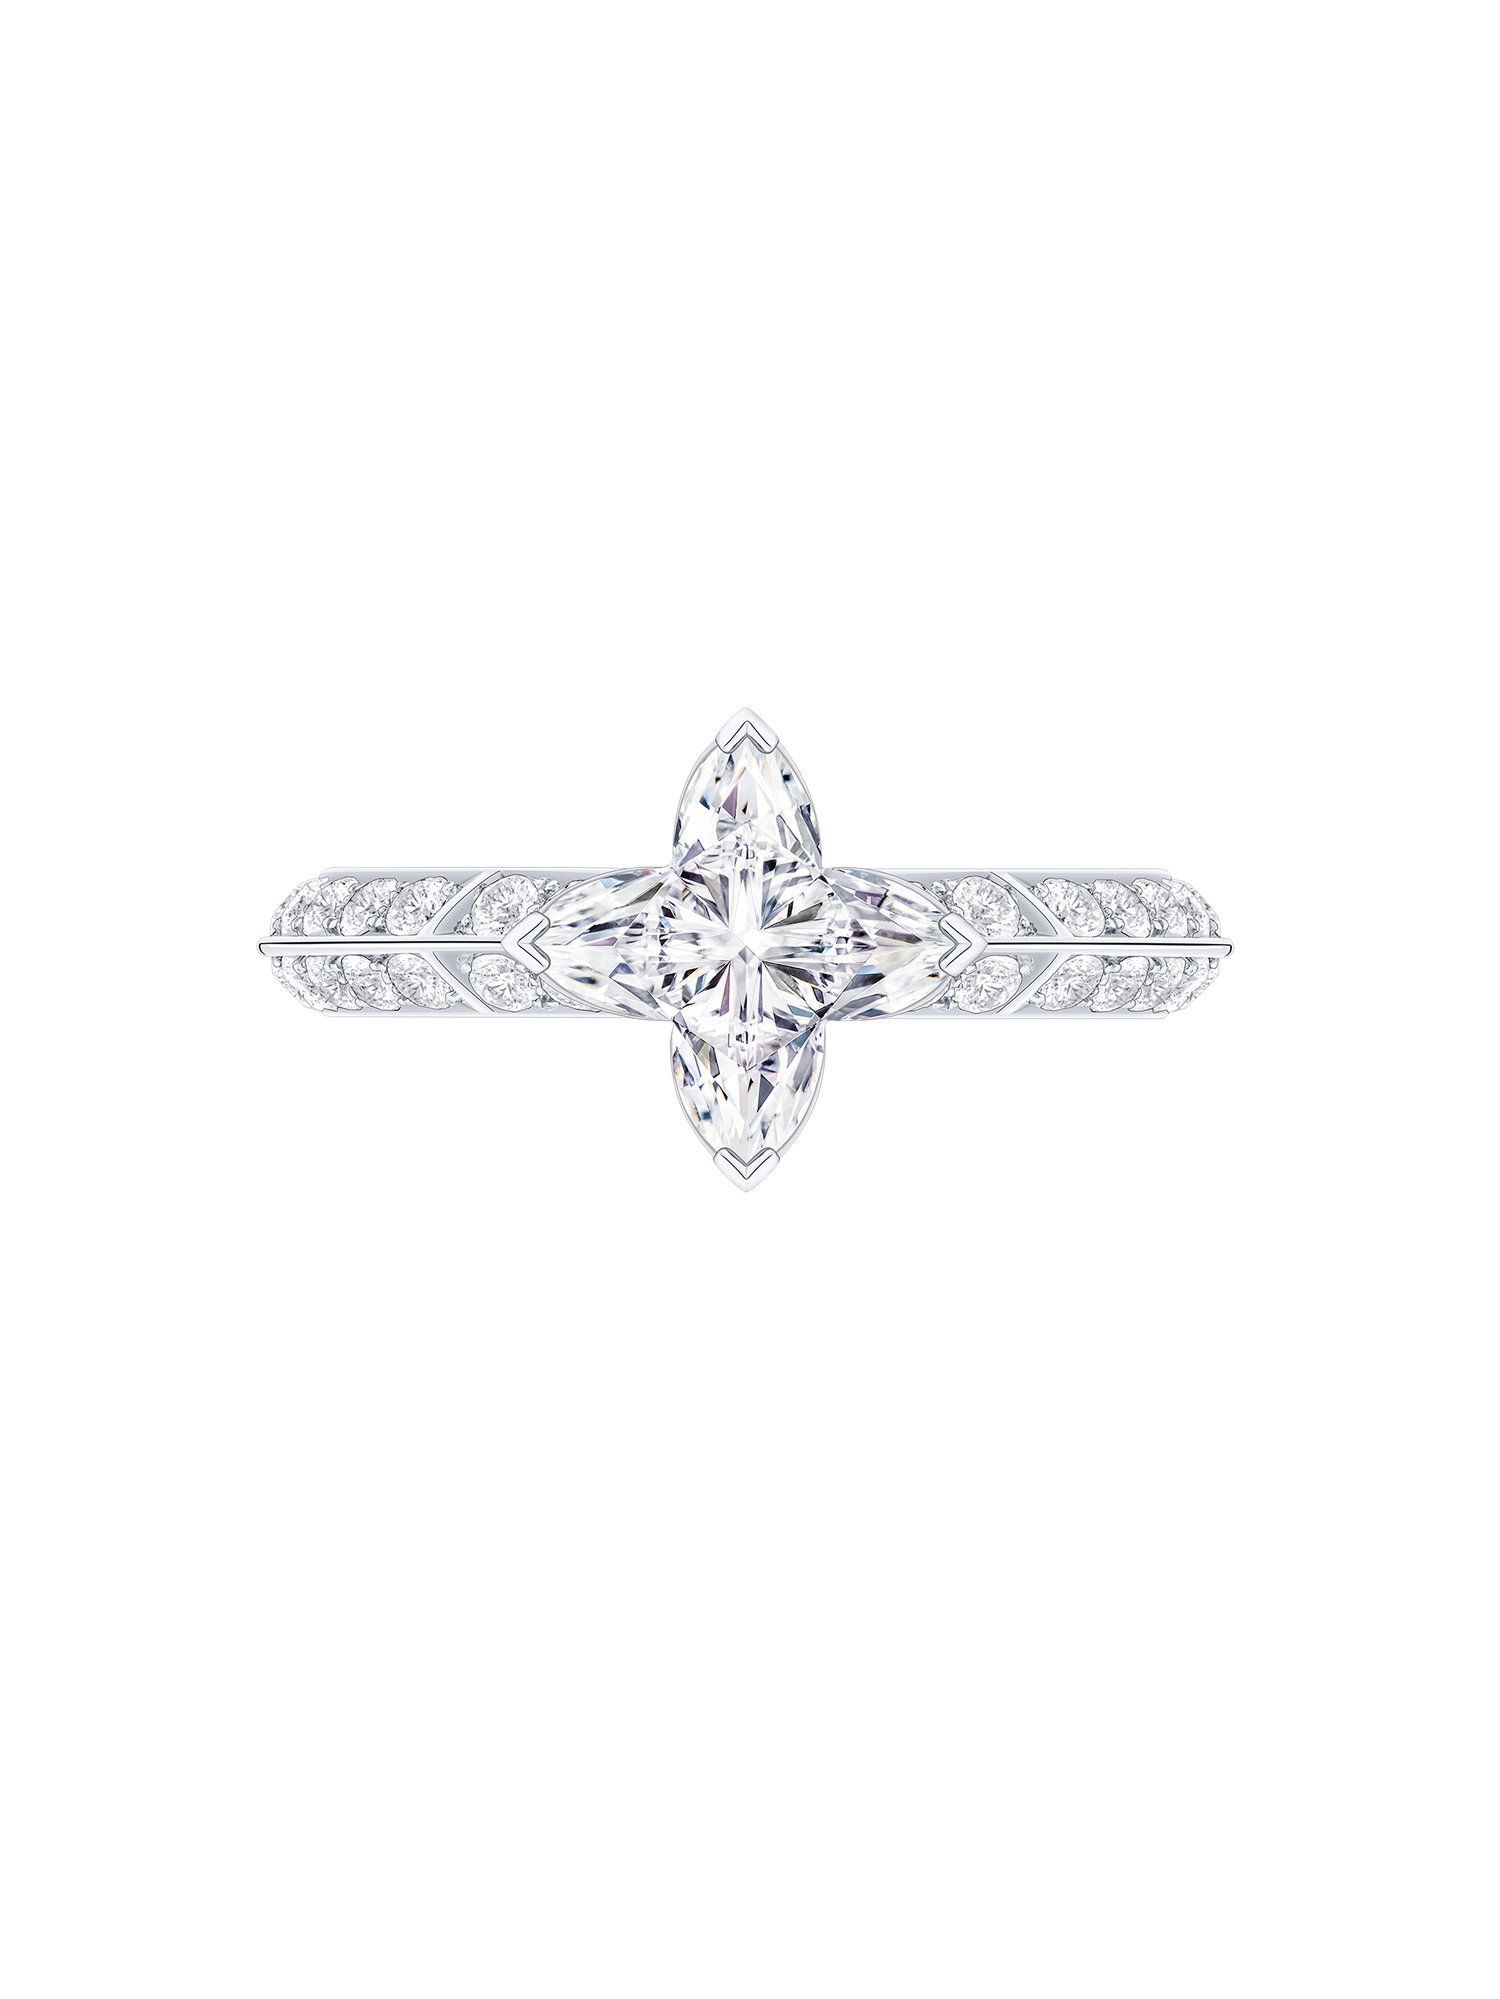 See Louis Vuitton's New Engagement Ring